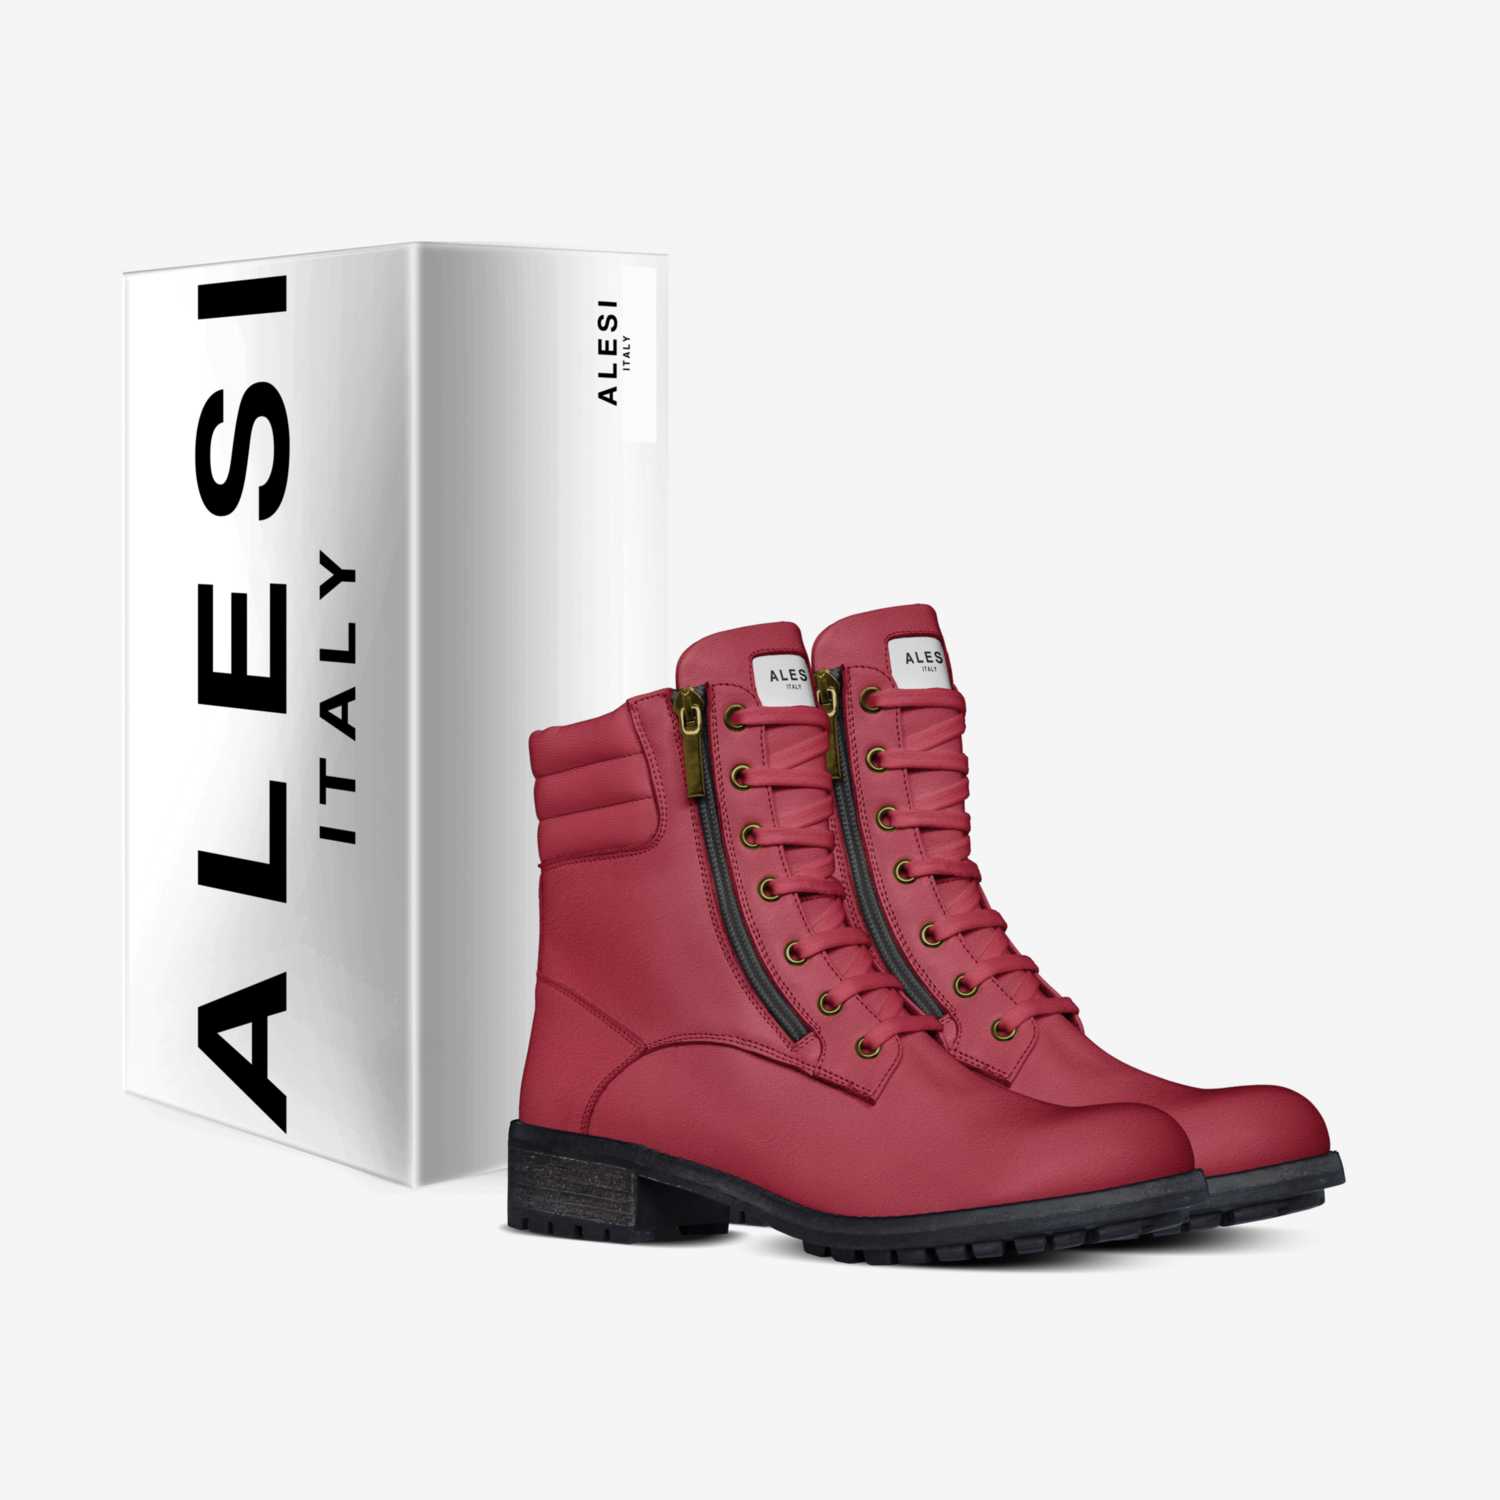 Alesi Lady Boots custom made in Italy shoes by Lonanthony Parker | Box view